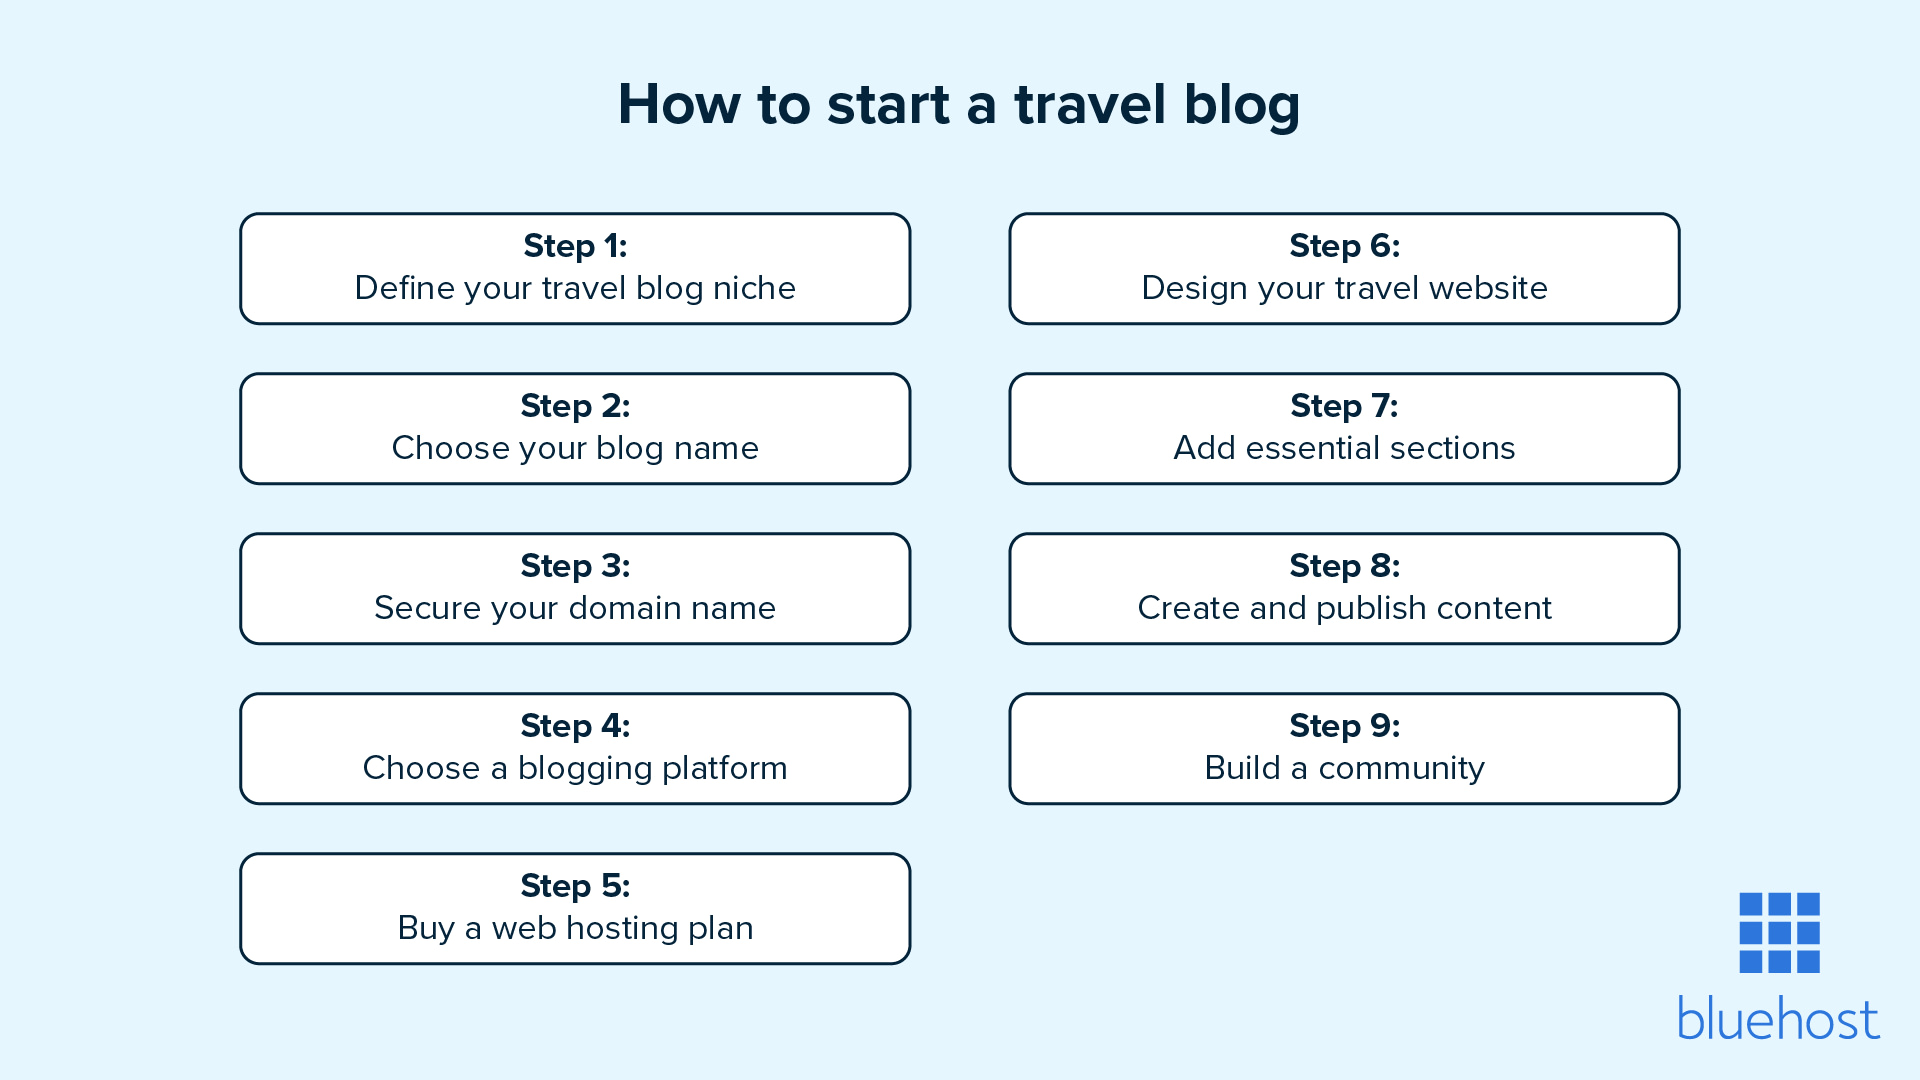 Start your own travel blog following these nine steps.